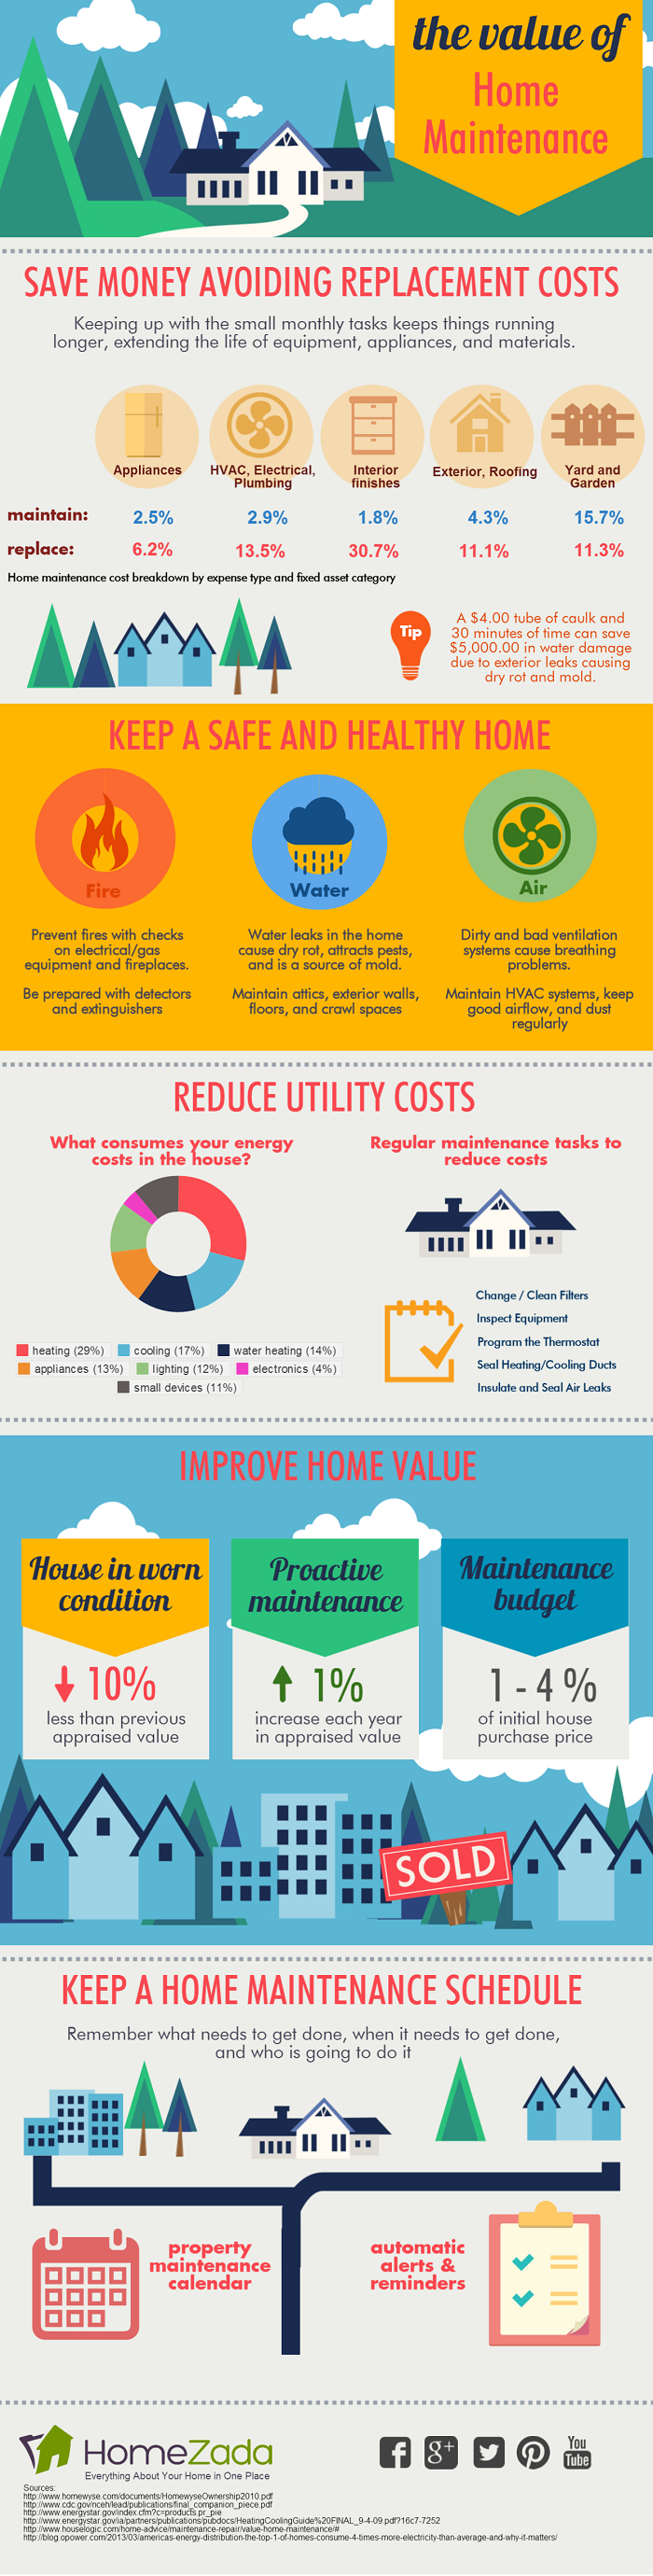 The Value of Home Maintenance infographic